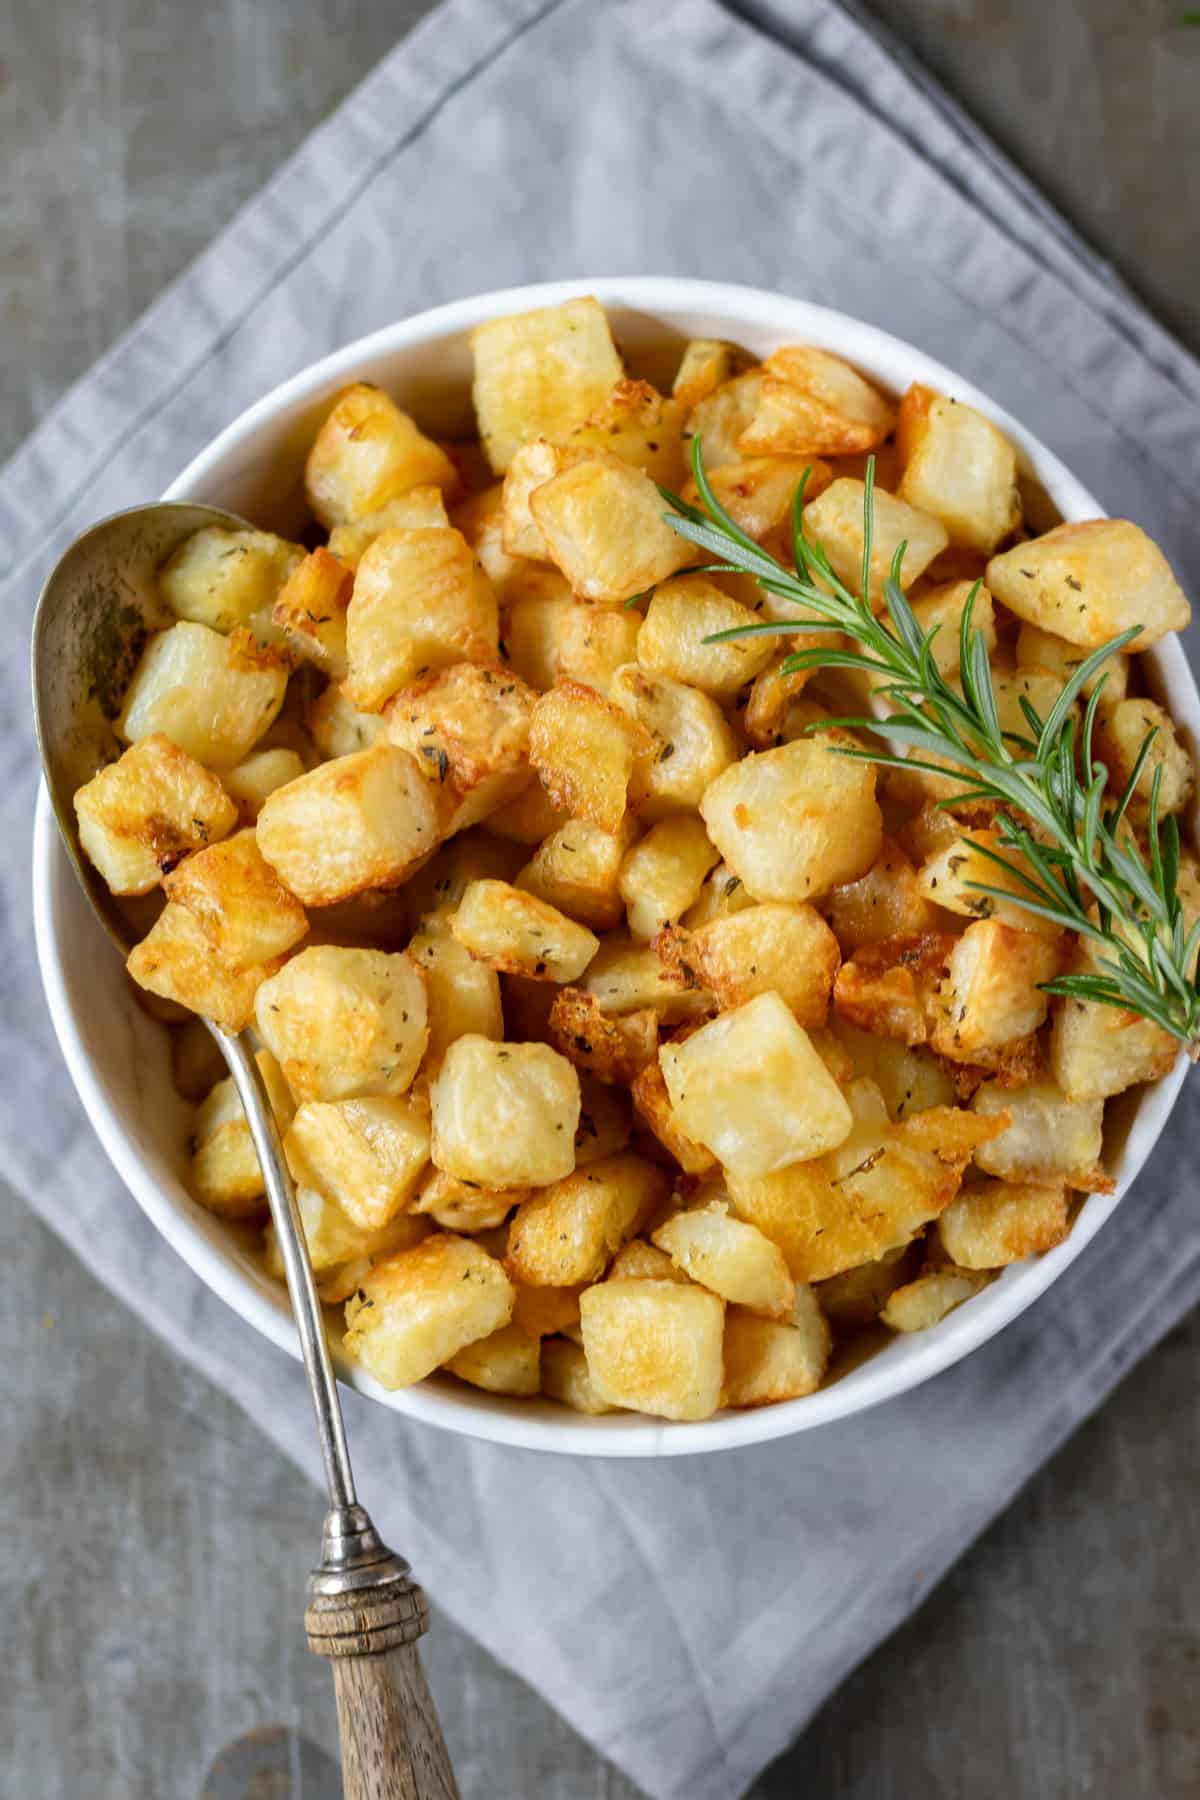 Looking down at a bowl of cubed crispy Parmentier Potatoes.